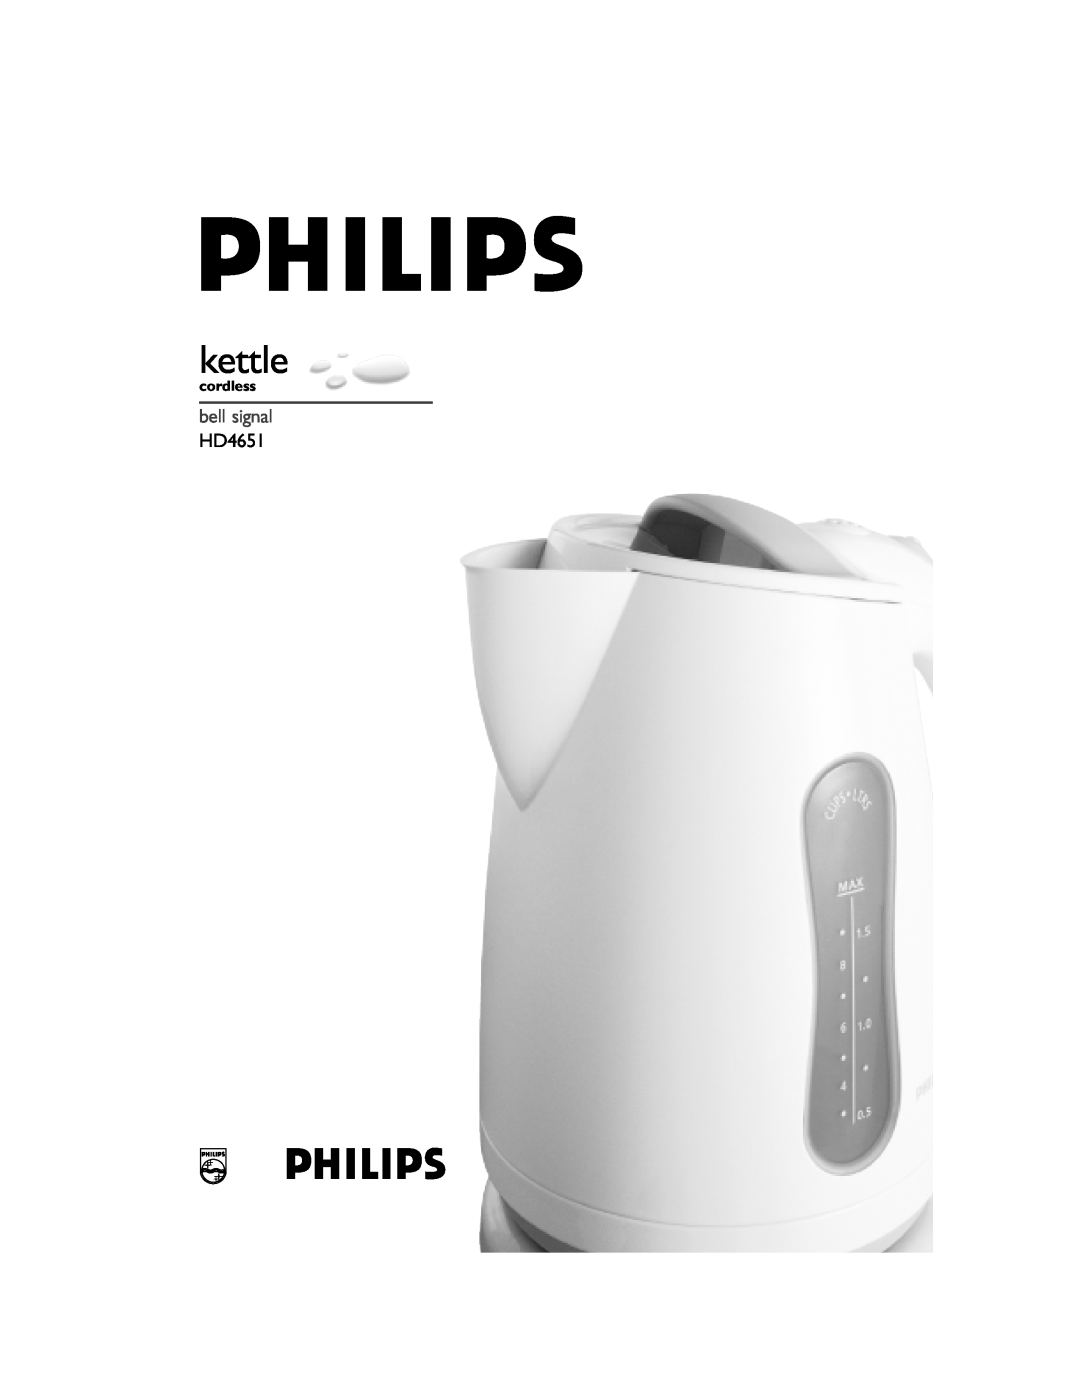 Philips manual kettle, bell signal HD4651, cordless 